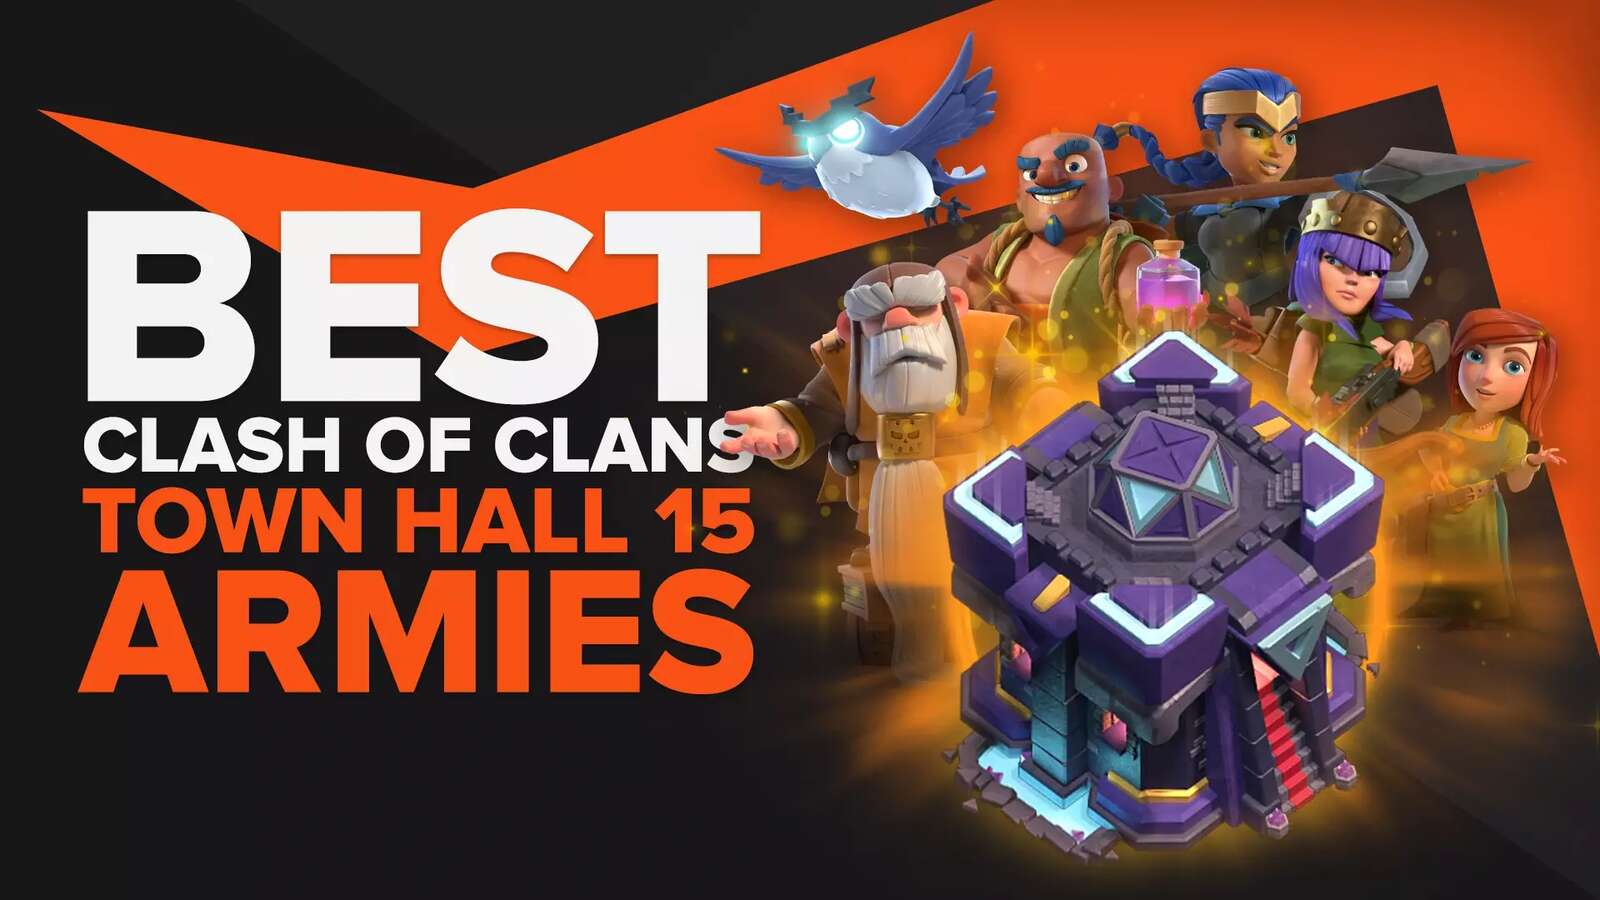 What Is The Best Army In Clash of Clans For Town Hall 15